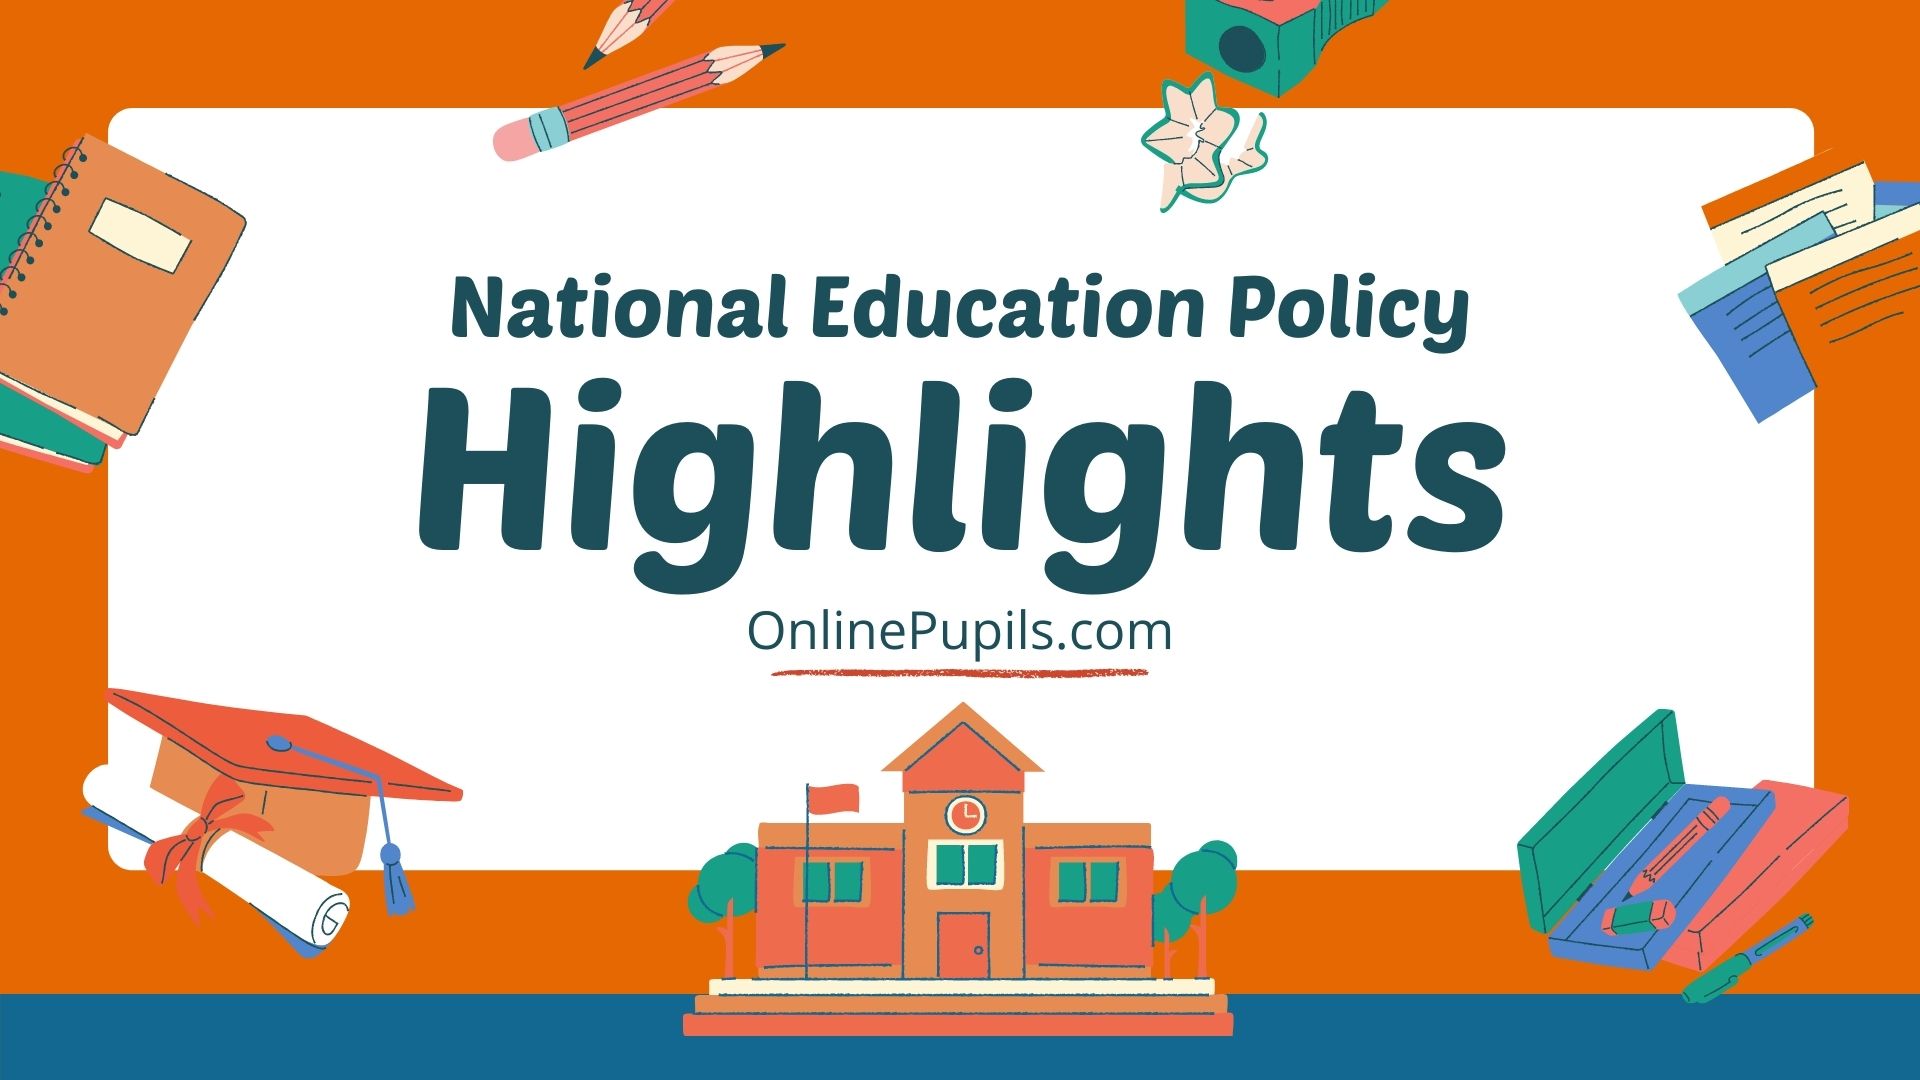 The National Education Policy 2020 Highlights